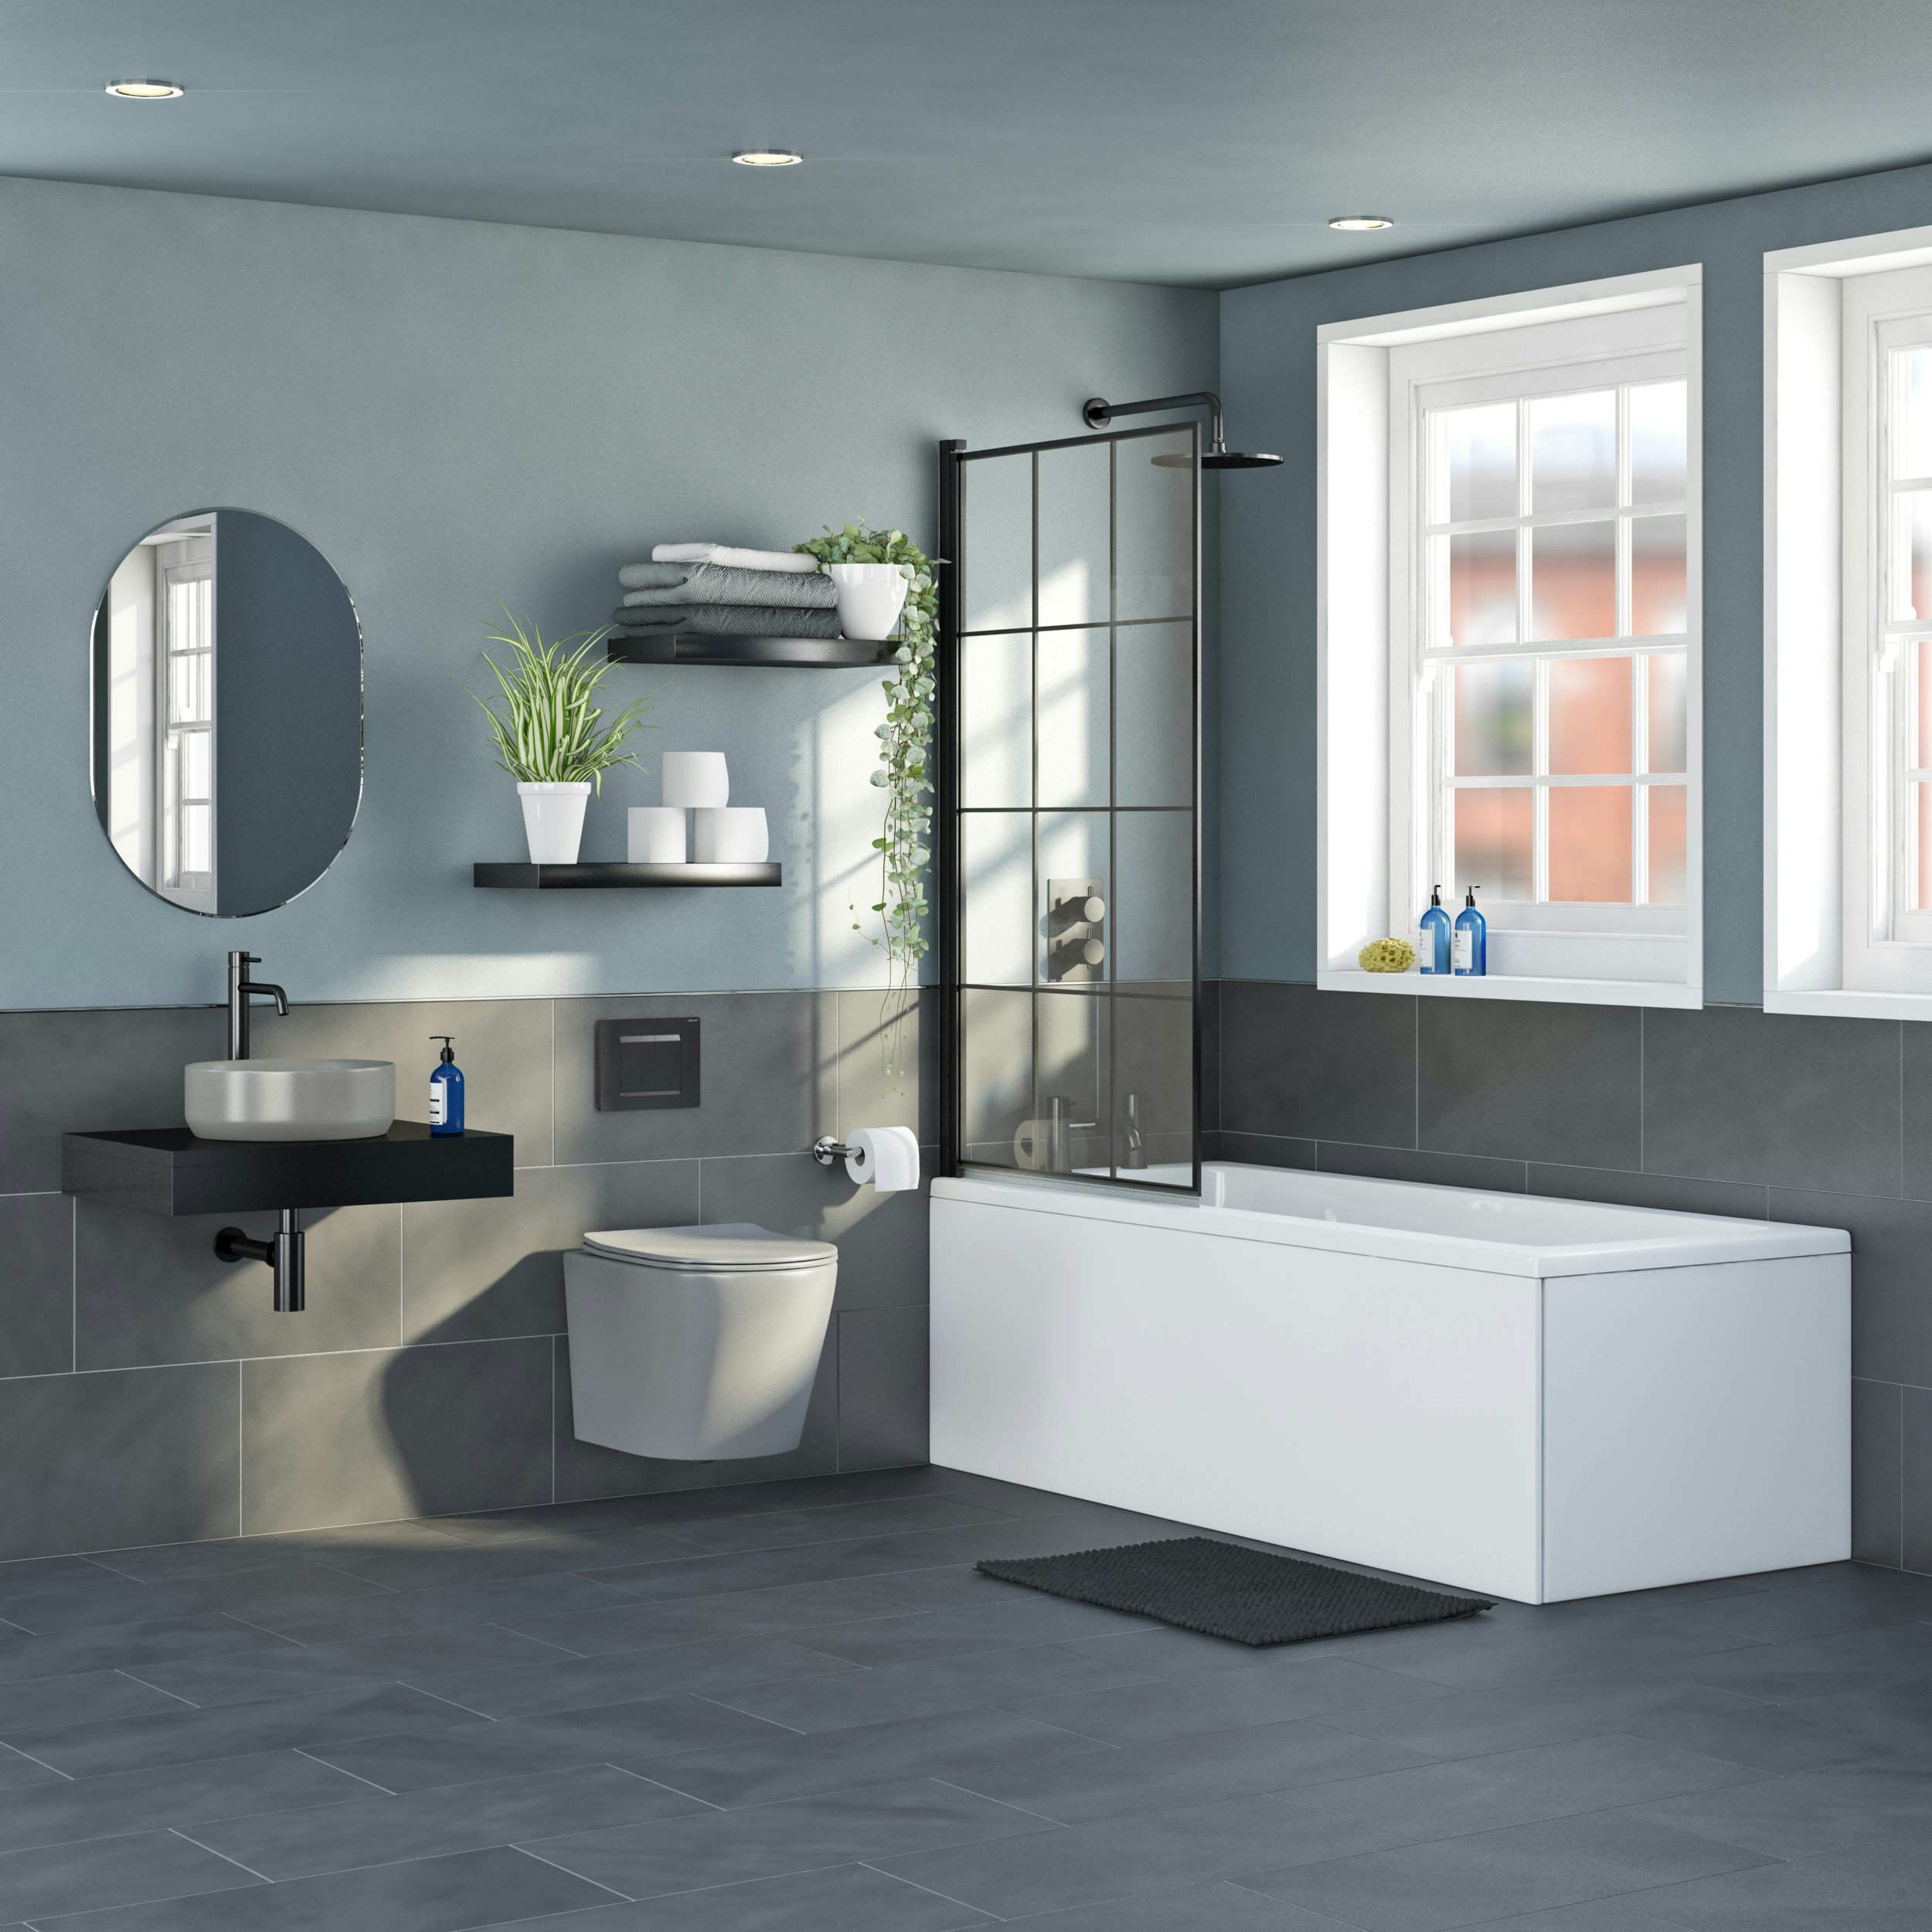 Mode Orion complete bathroom suite with contemporary stone grey wall hung toilet and straight shower bath